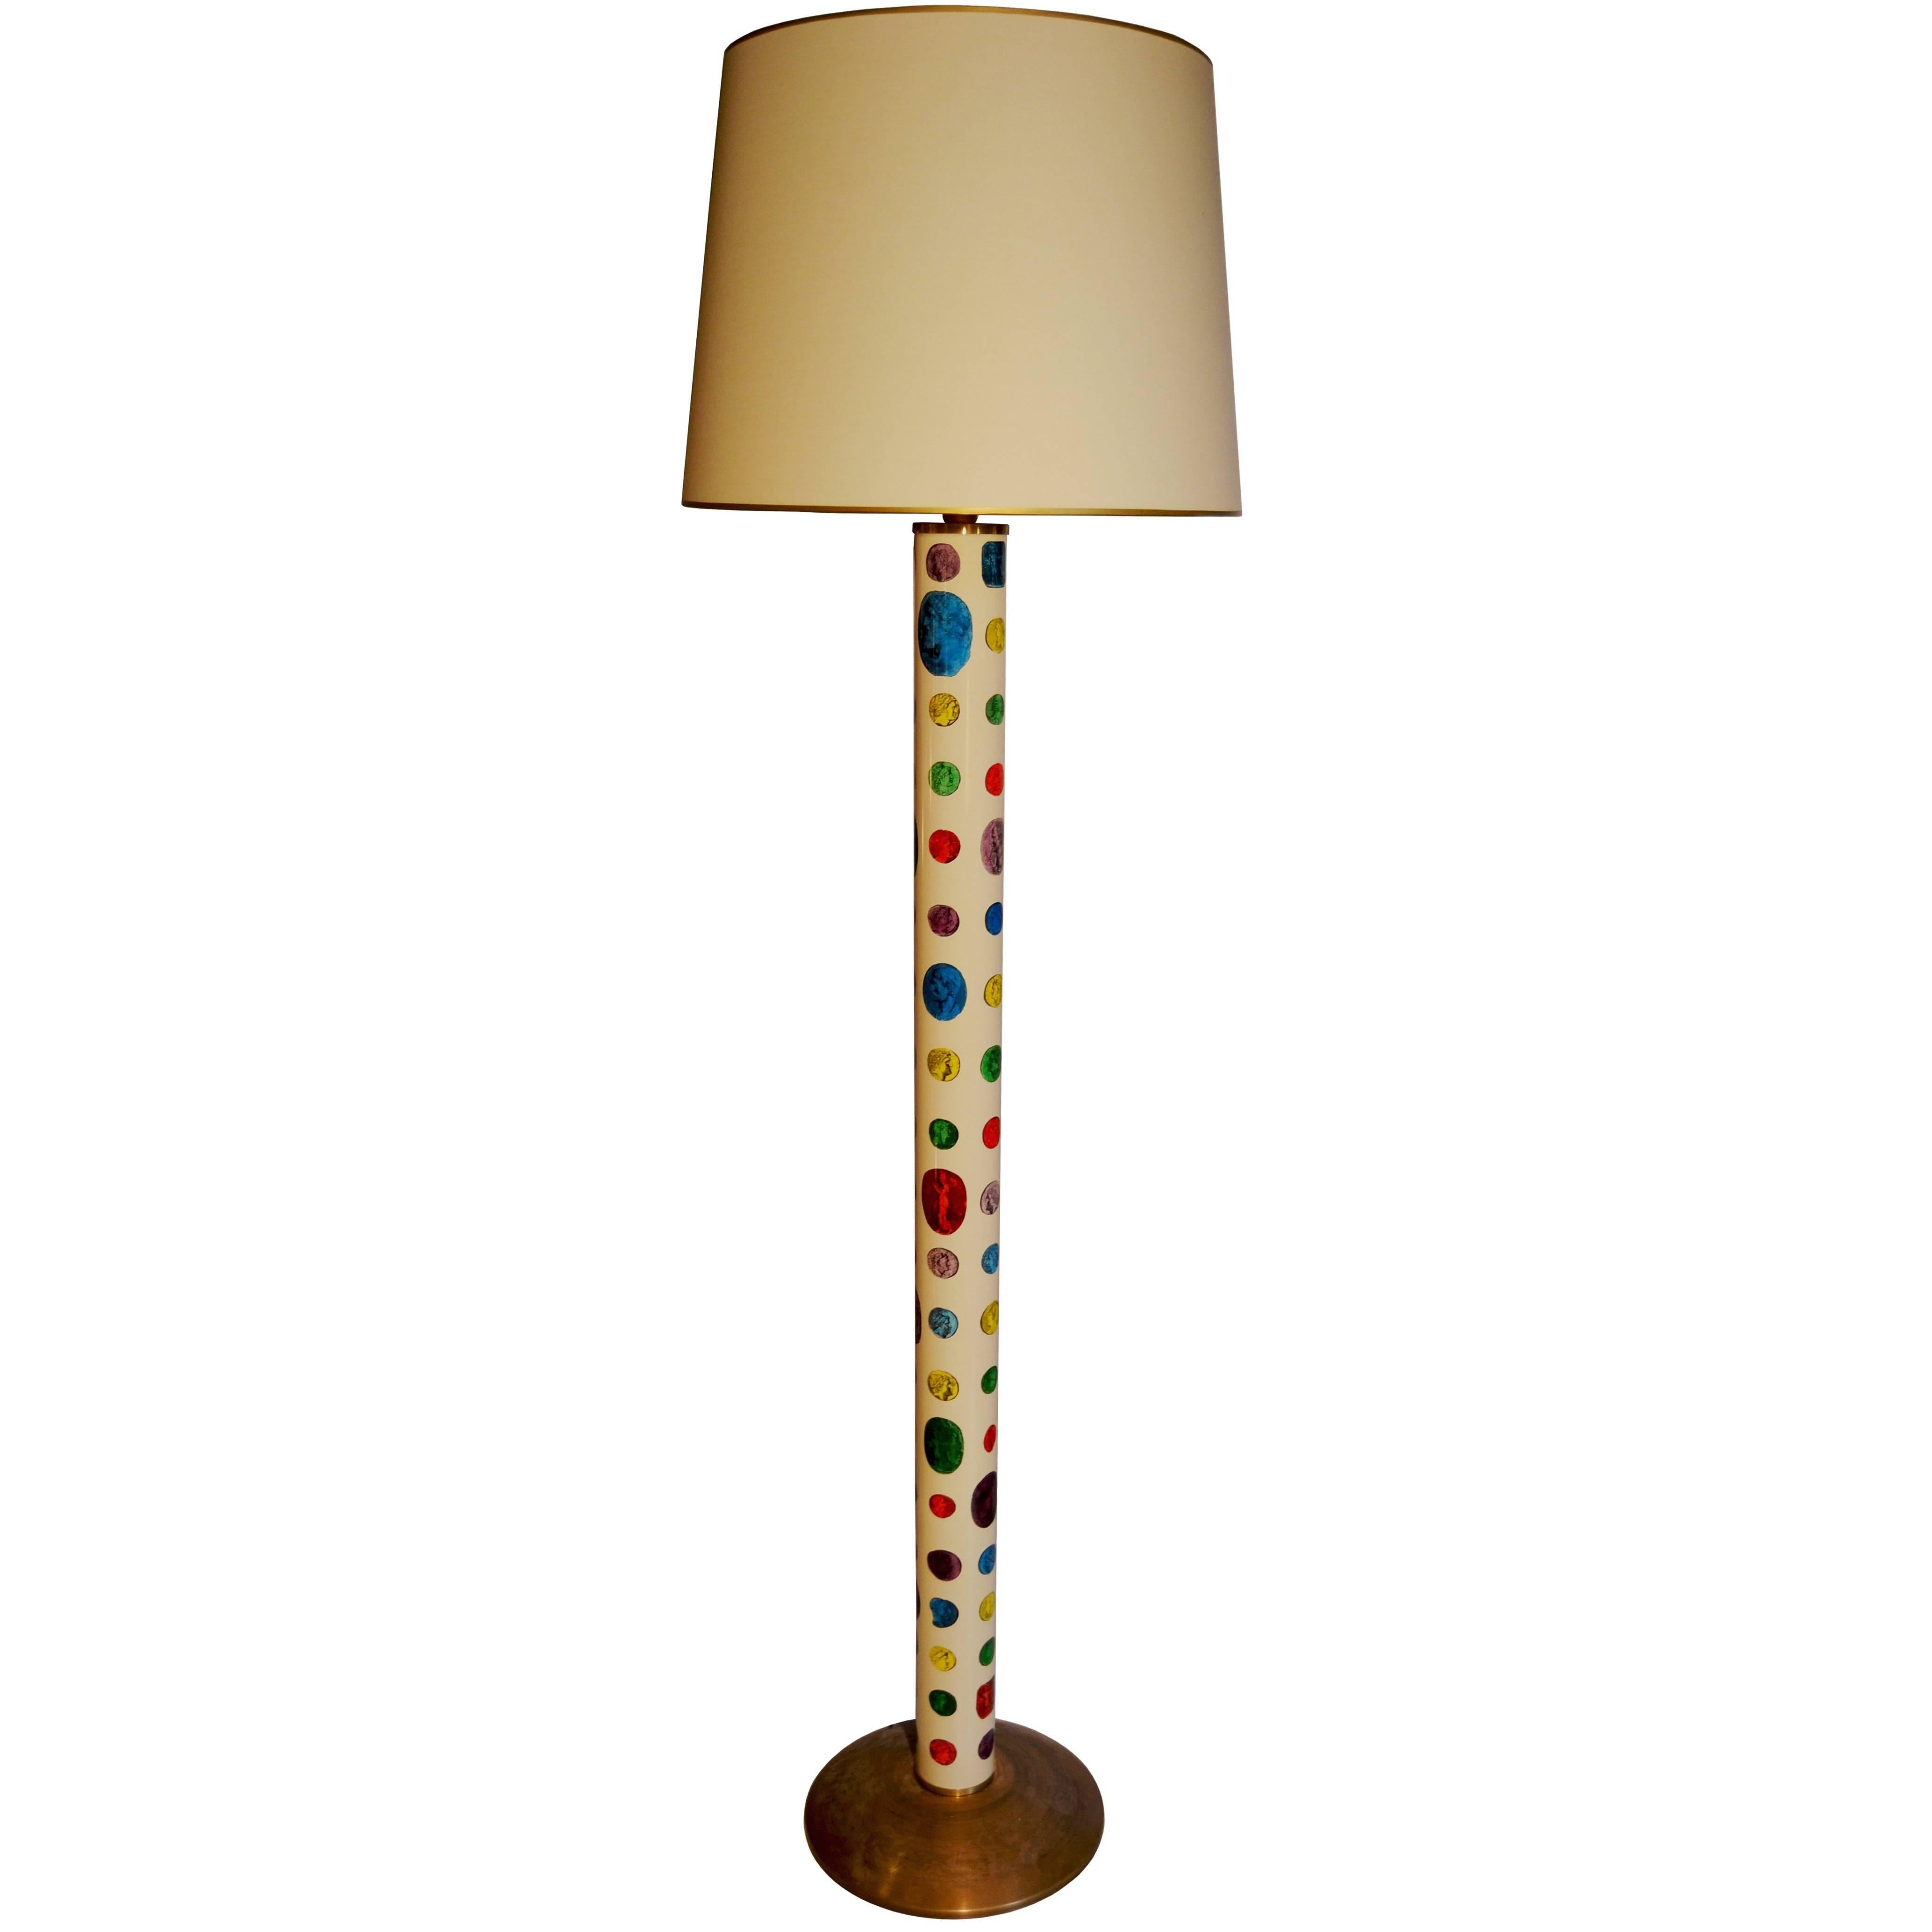 Large "Cammei" Floor Lamp by Fornasetti For Sale